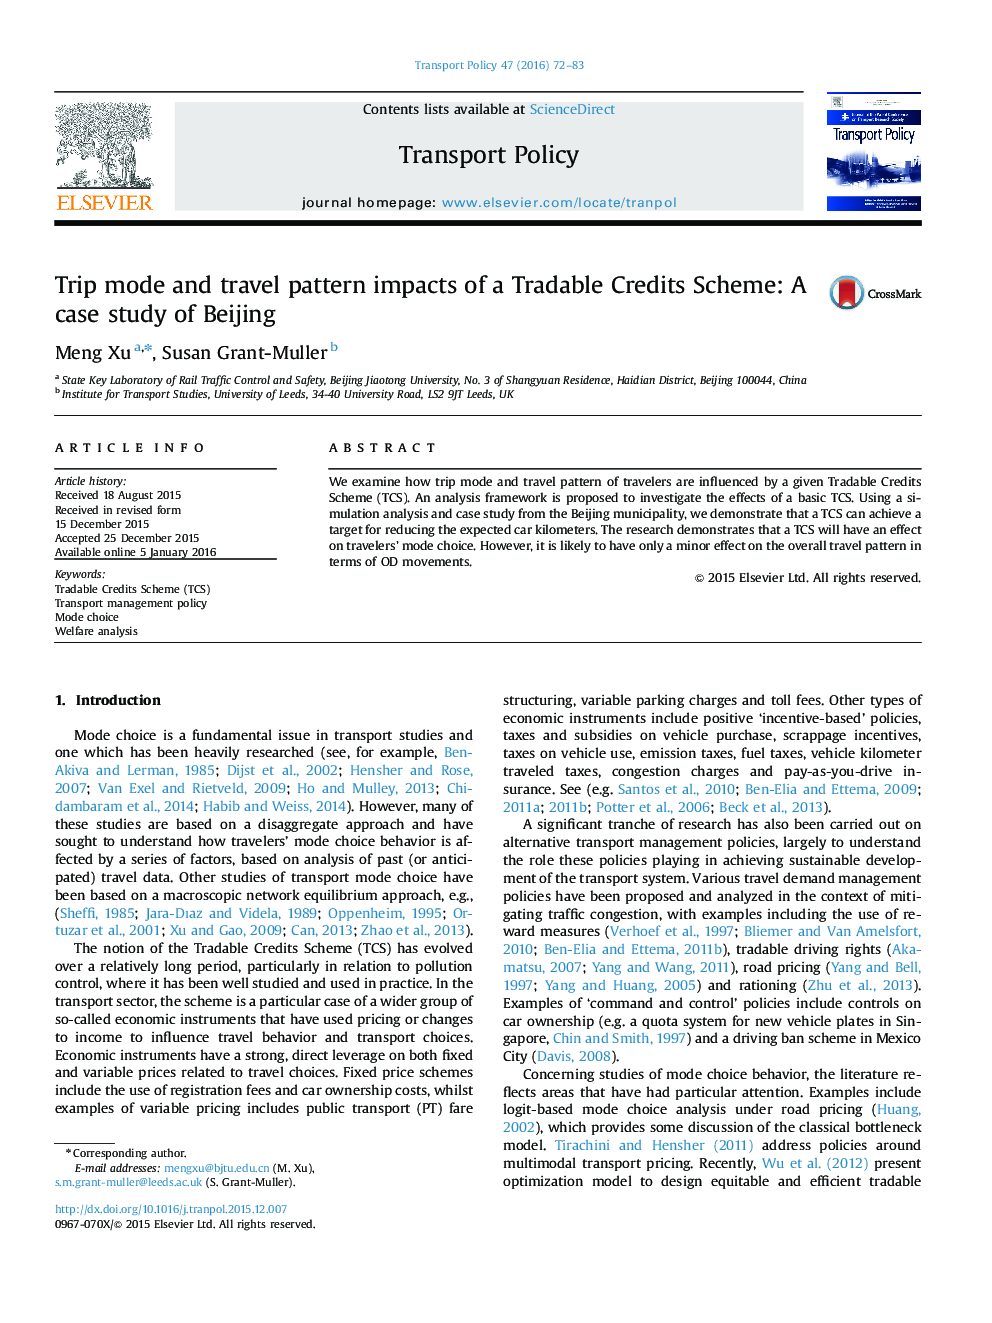 Trip mode and travel pattern impacts of a Tradable Credits Scheme: A case study of Beijing